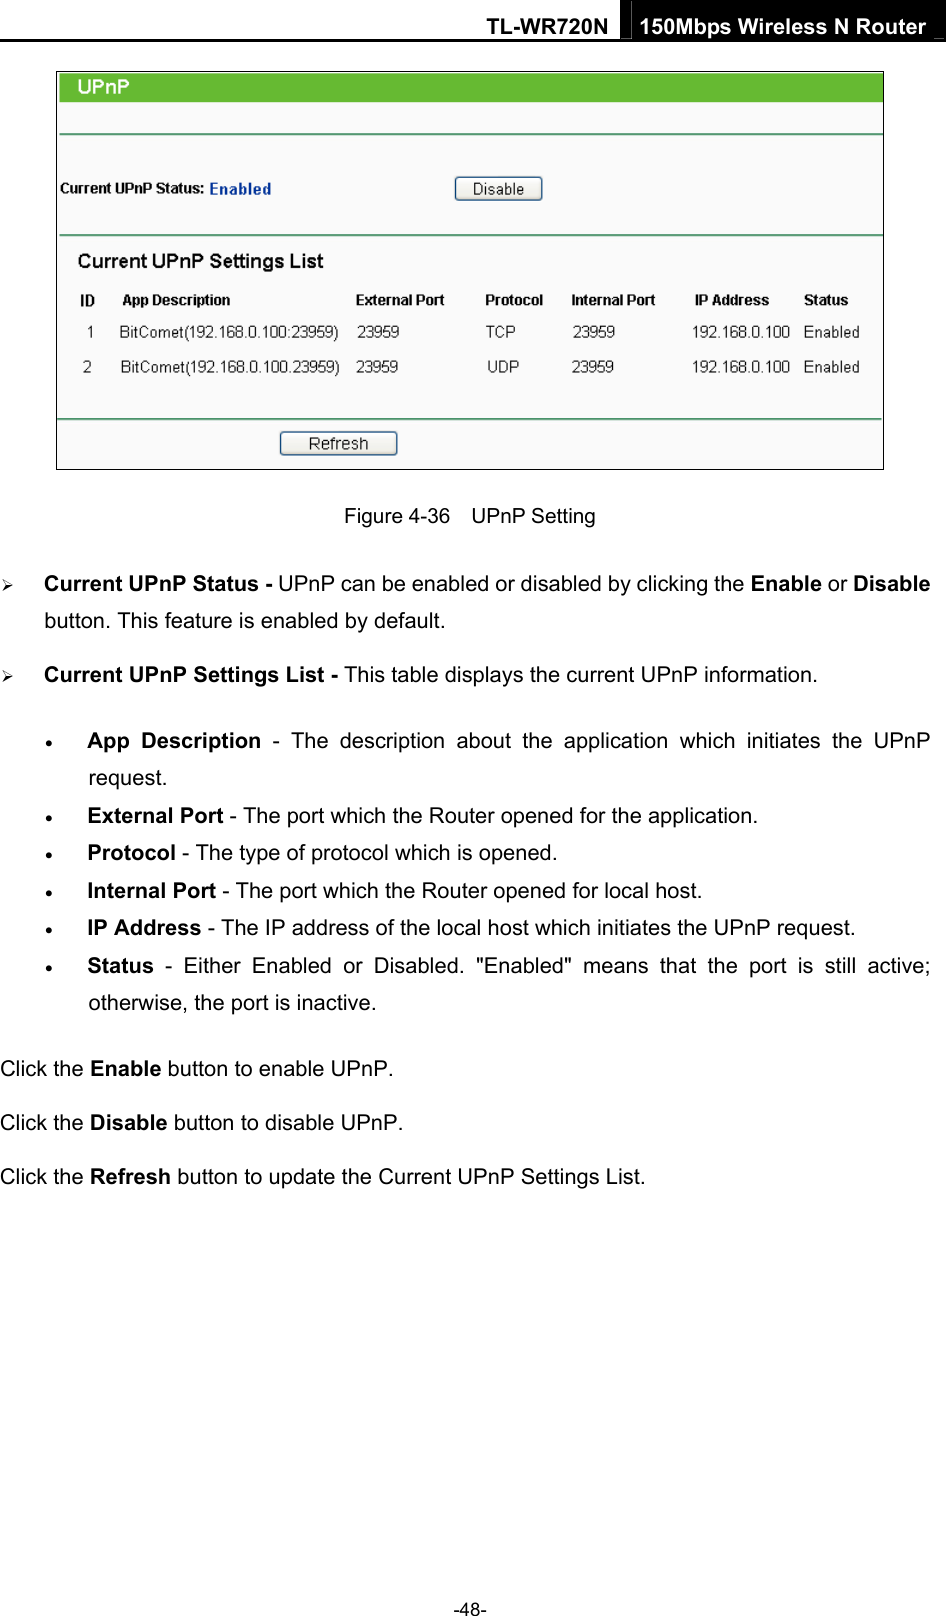 TL-WR720N 150Mbps Wireless N Router  Figure 4-36  UPnP Setting ¾ Current UPnP Status - UPnP can be enabled or disabled by clicking the Enable or Disable button. This feature is enabled by default. ¾ Current UPnP Settings List - This table displays the current UPnP information. • App Description - The description about the application which initiates the UPnP request.  • External Port - The port which the Router opened for the application.   • Protocol - The type of protocol which is opened.   • Internal Port - The port which the Router opened for local host.   • IP Address - The IP address of the local host which initiates the UPnP request.   • Status - Either Enabled or Disabled. &quot;Enabled&quot; means that the port is still active; otherwise, the port is inactive.   Click the Enable button to enable UPnP. Click the Disable button to disable UPnP. Click the Refresh button to update the Current UPnP Settings List. -48- 